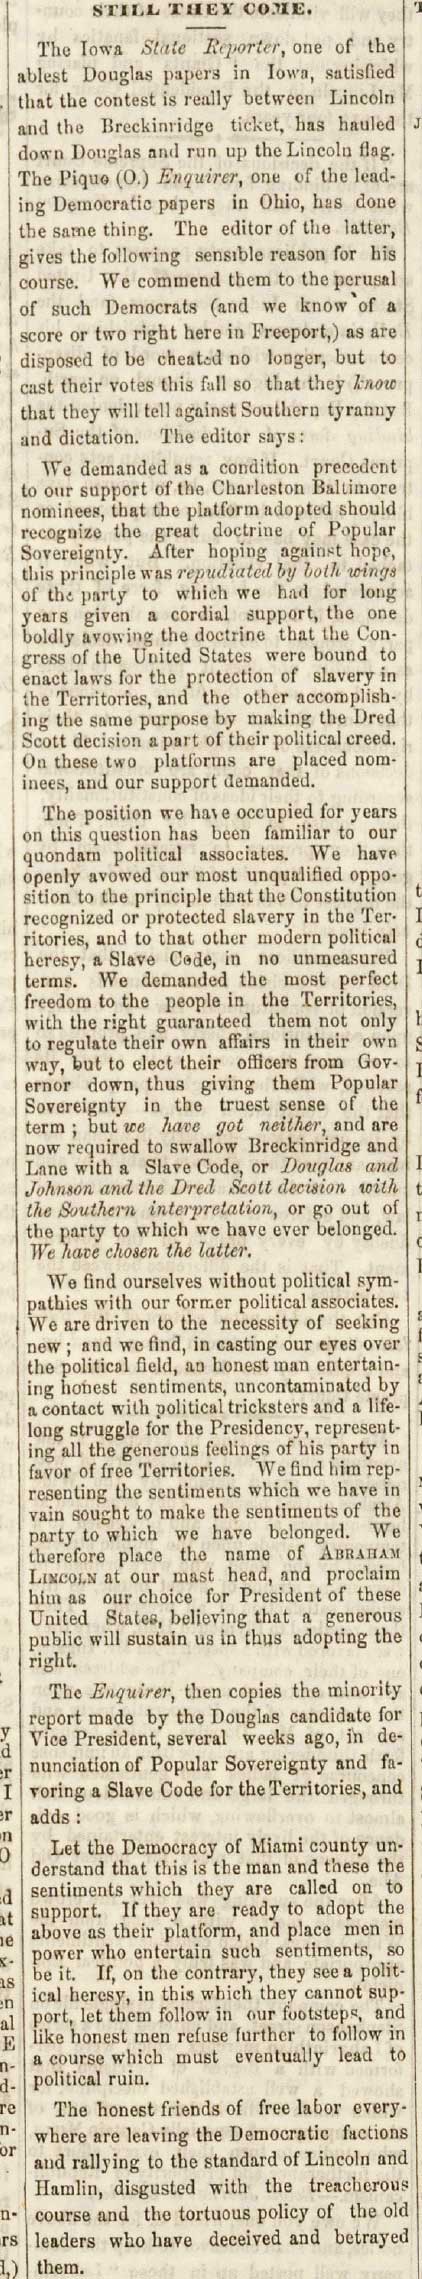 Freeport Wide Awake Abraham Lincoln Campaign Newspaper August 18, 1860 Article